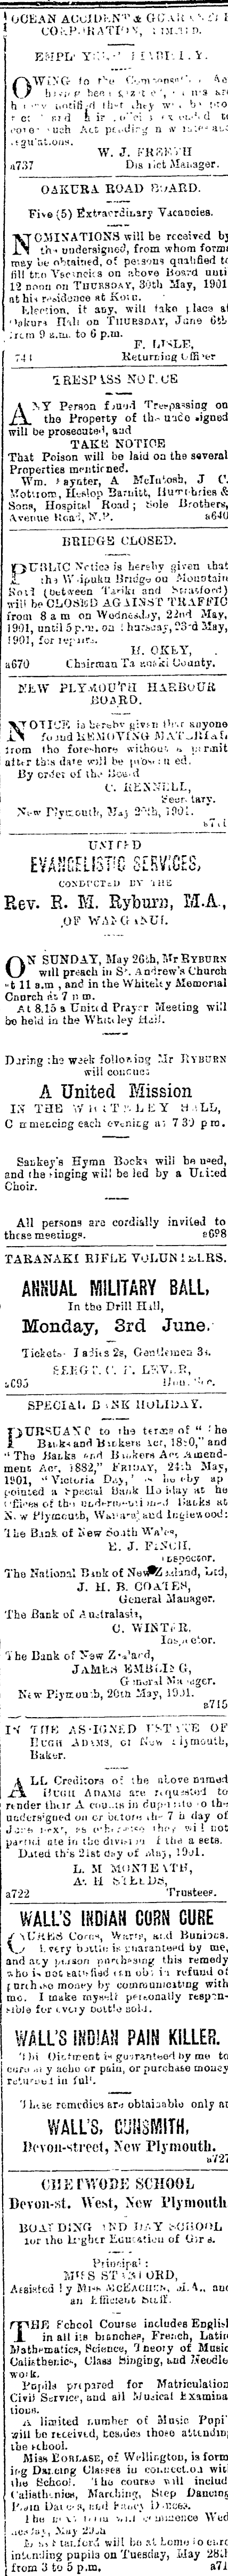 Papers Past Newspapers Taranaki Herald 22 May 1901 Page 3 Advertisements Column 2